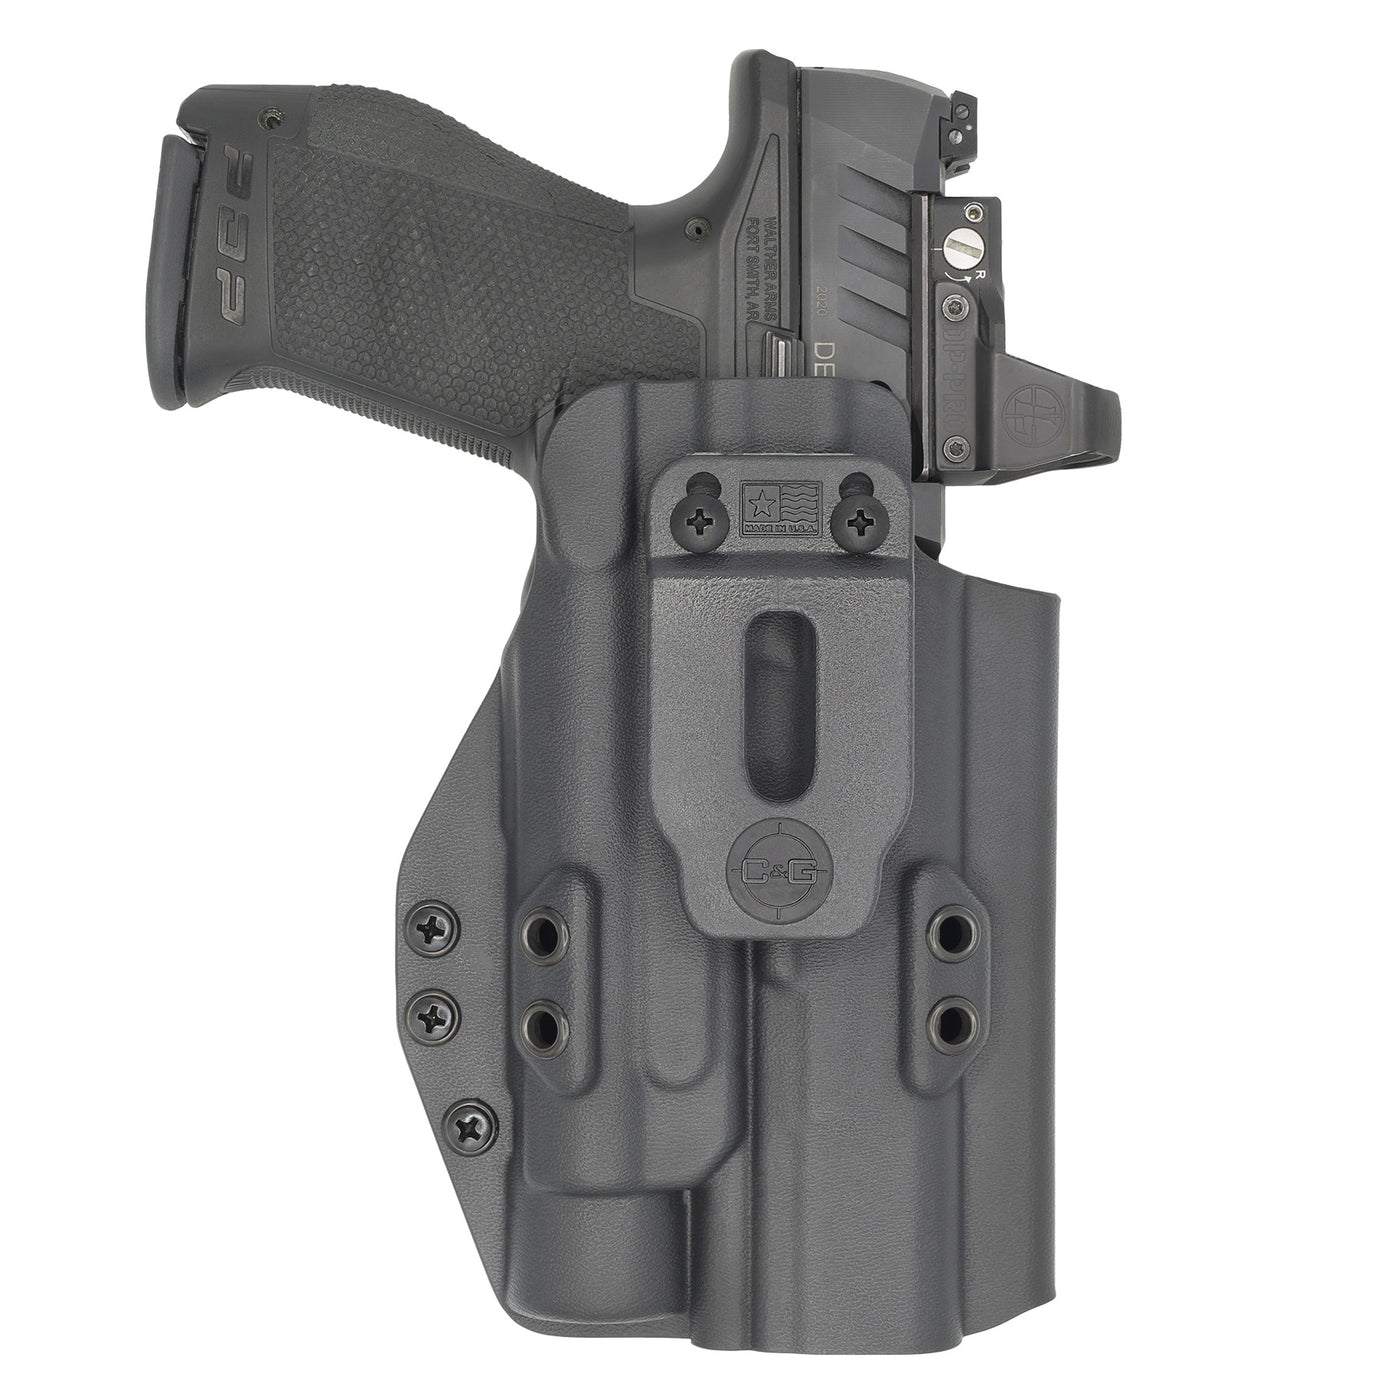 C&G Holsters Quickship IWB Tactical Beretta Streamlight TLR-1 in holstered position